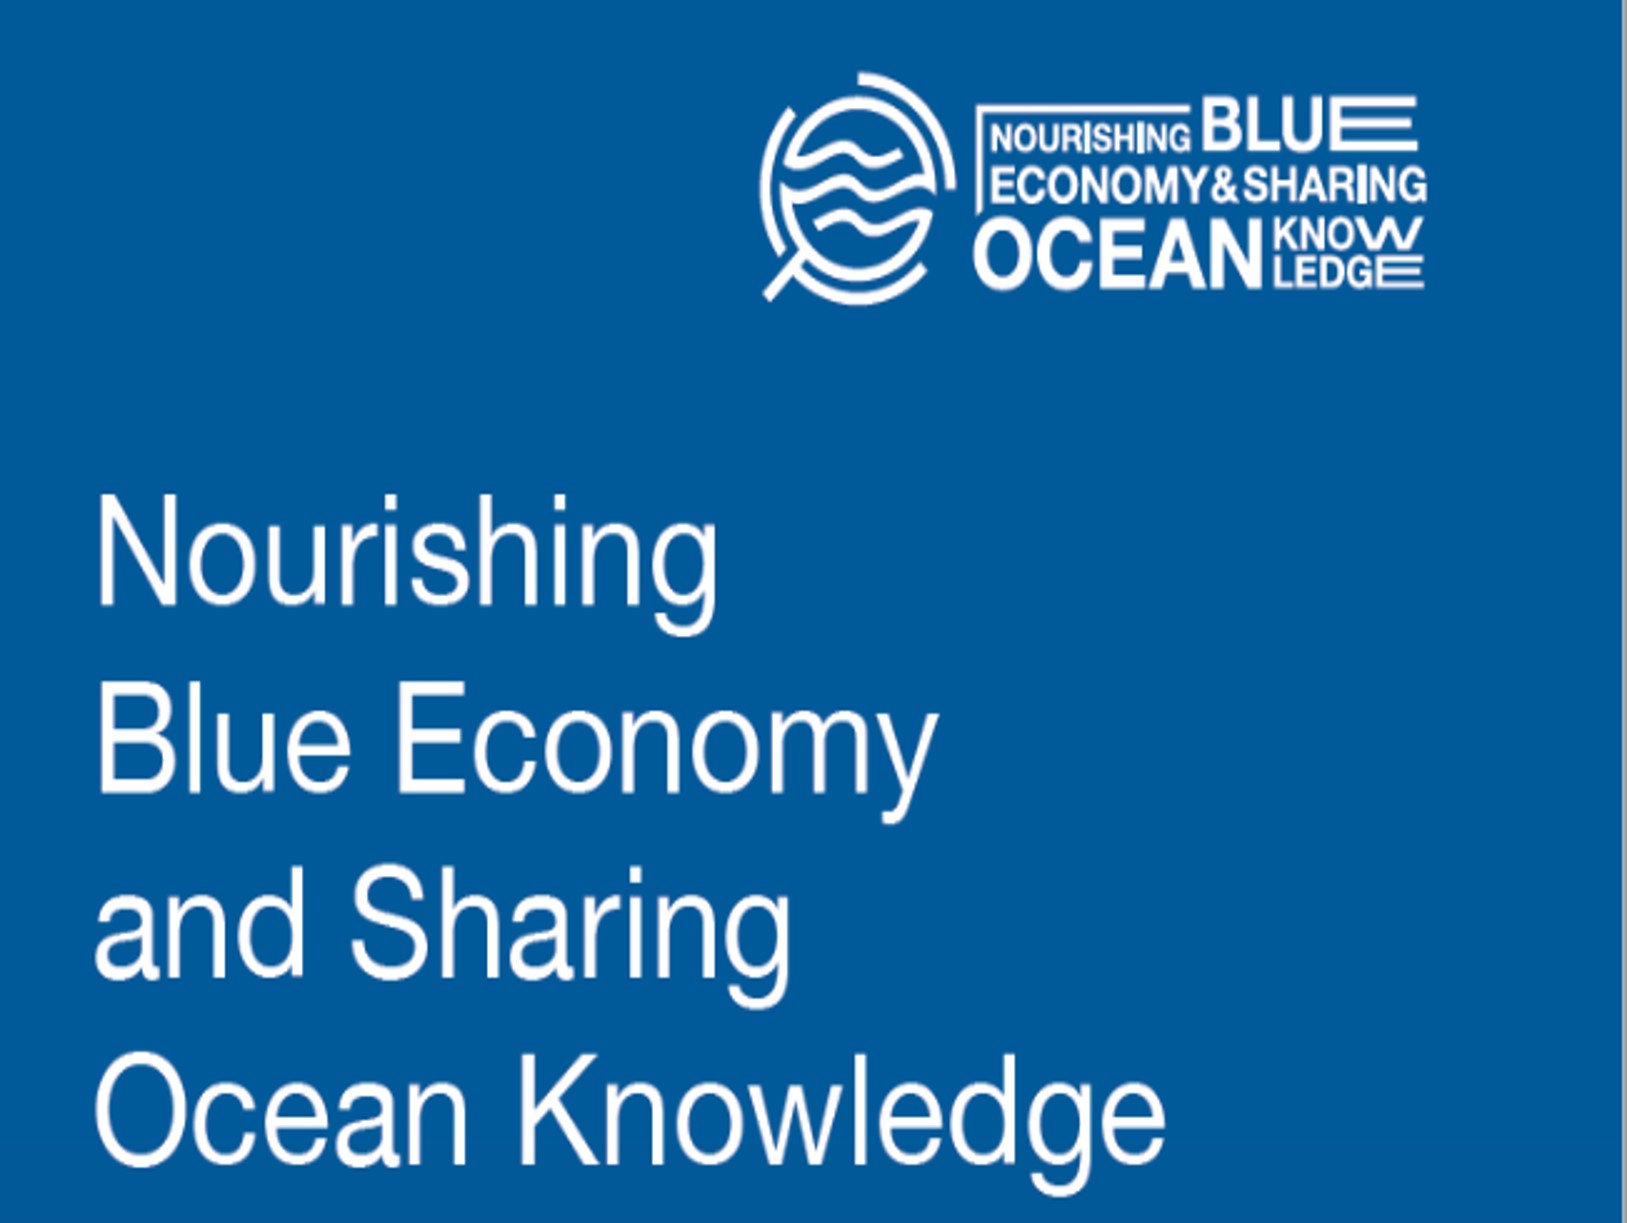 The policy brief for ‘Nourishing Blue Economy and Sharing Ocean Knowledge’ 